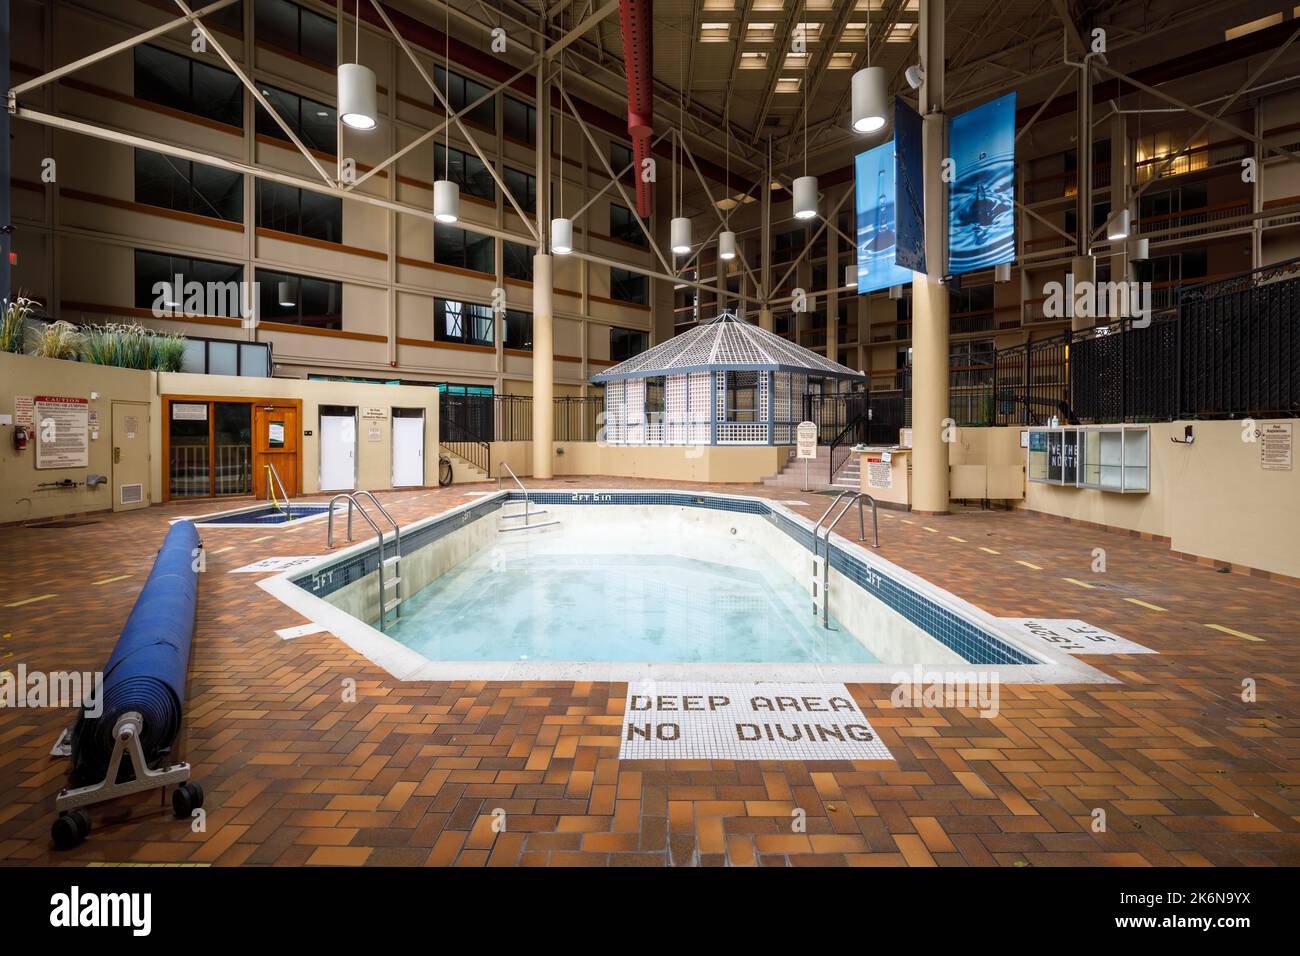 The indoor swimming pool at the now demolished Holiday Inn Yorkdale Hotel in Toronto, Ontario, Canada. Stock Photo